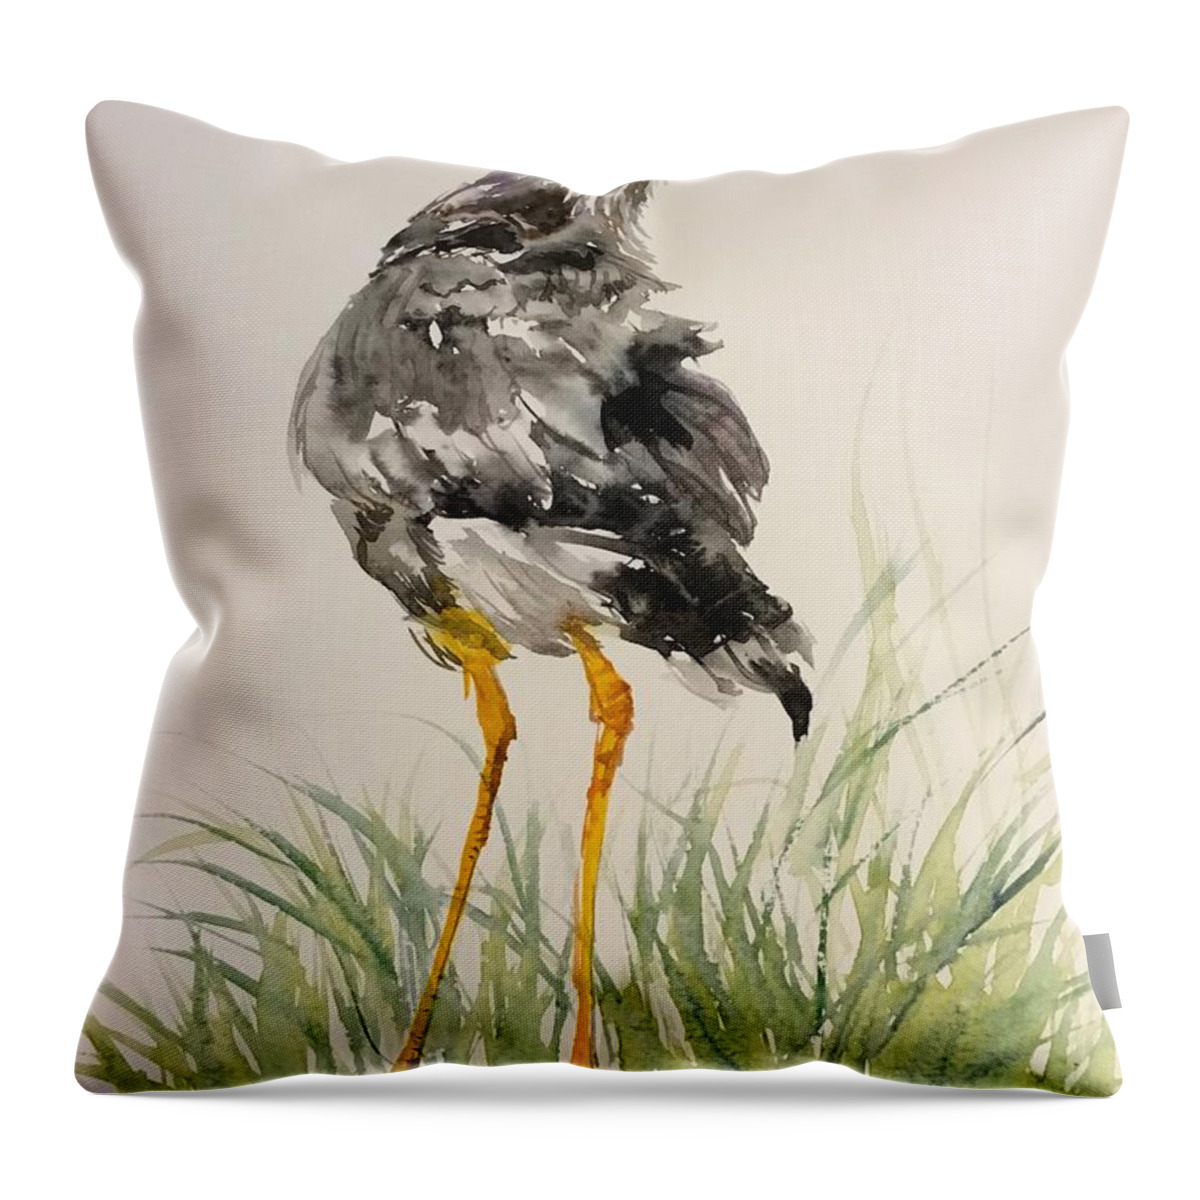 1332019 Throw Pillow featuring the painting 1332019 by Han in Huang wong